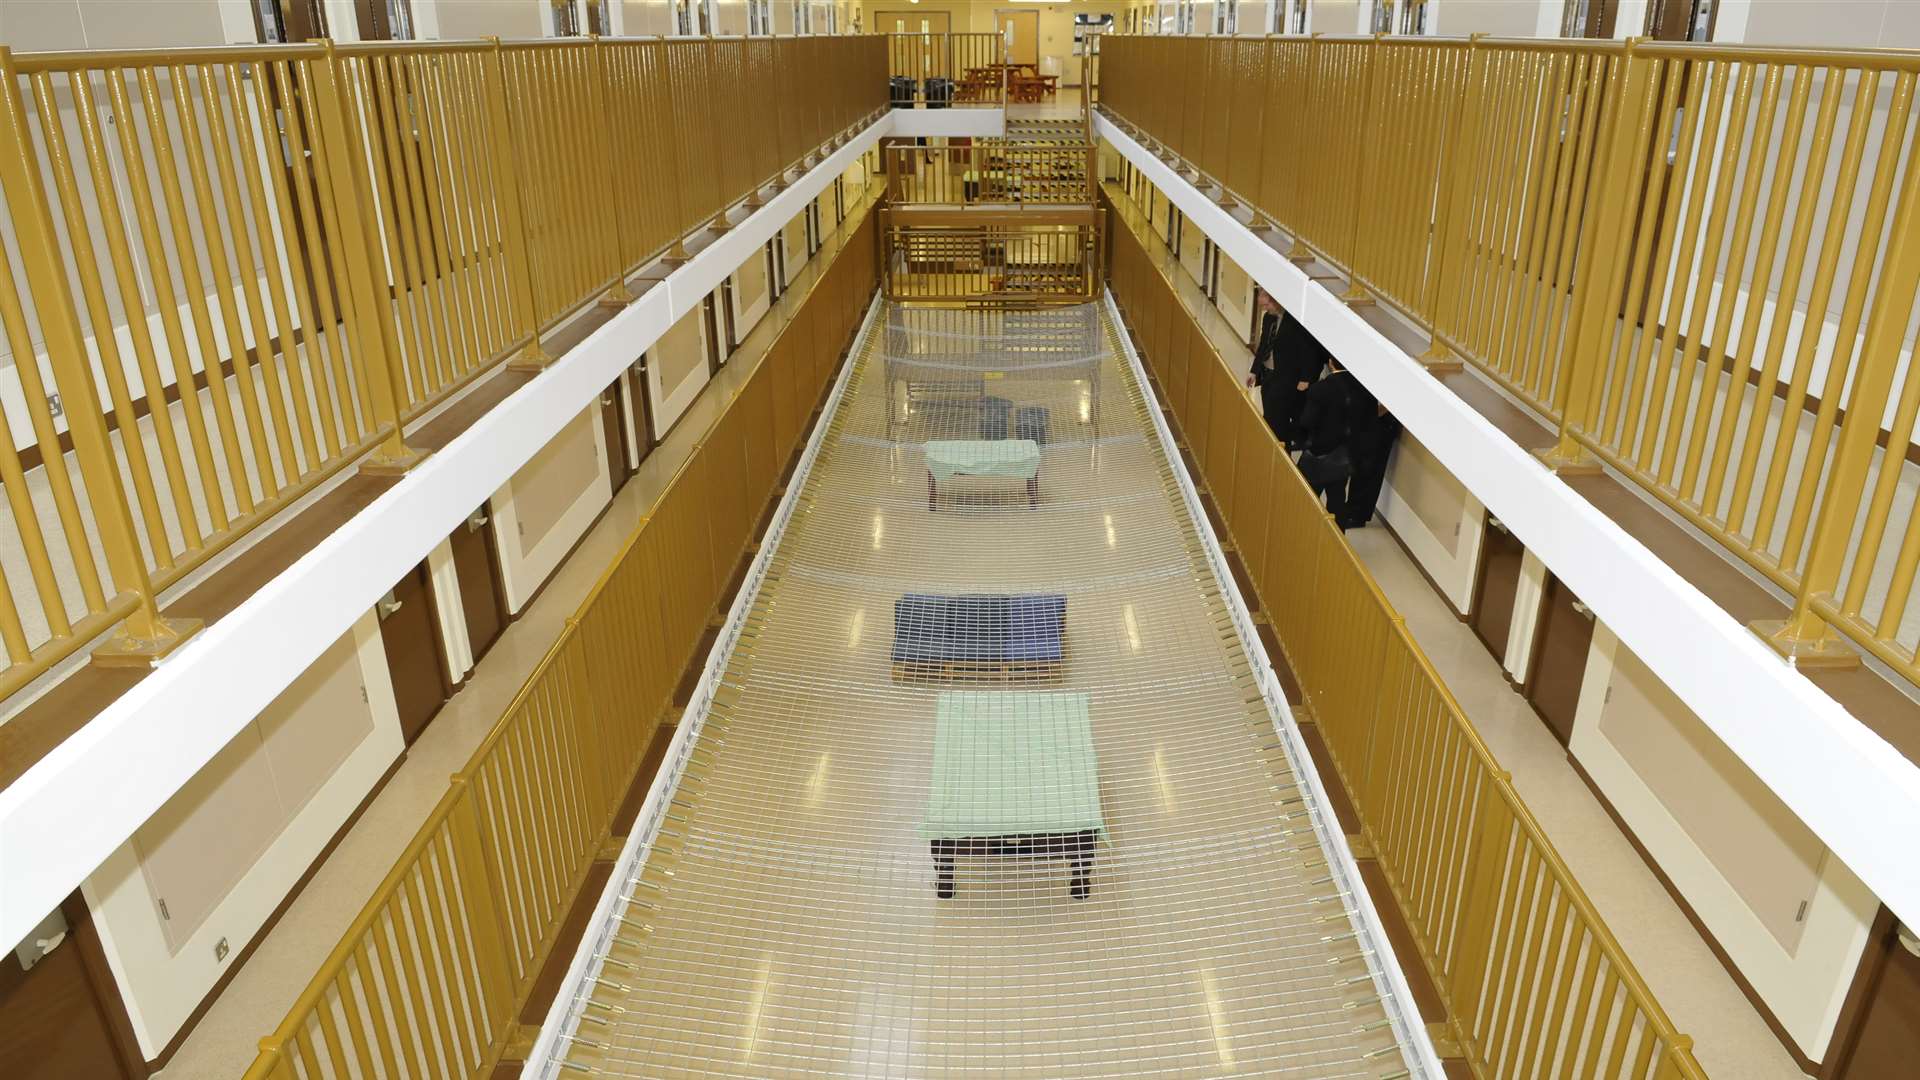 Trouble at HMP Swaleside has been blamed on understaffing